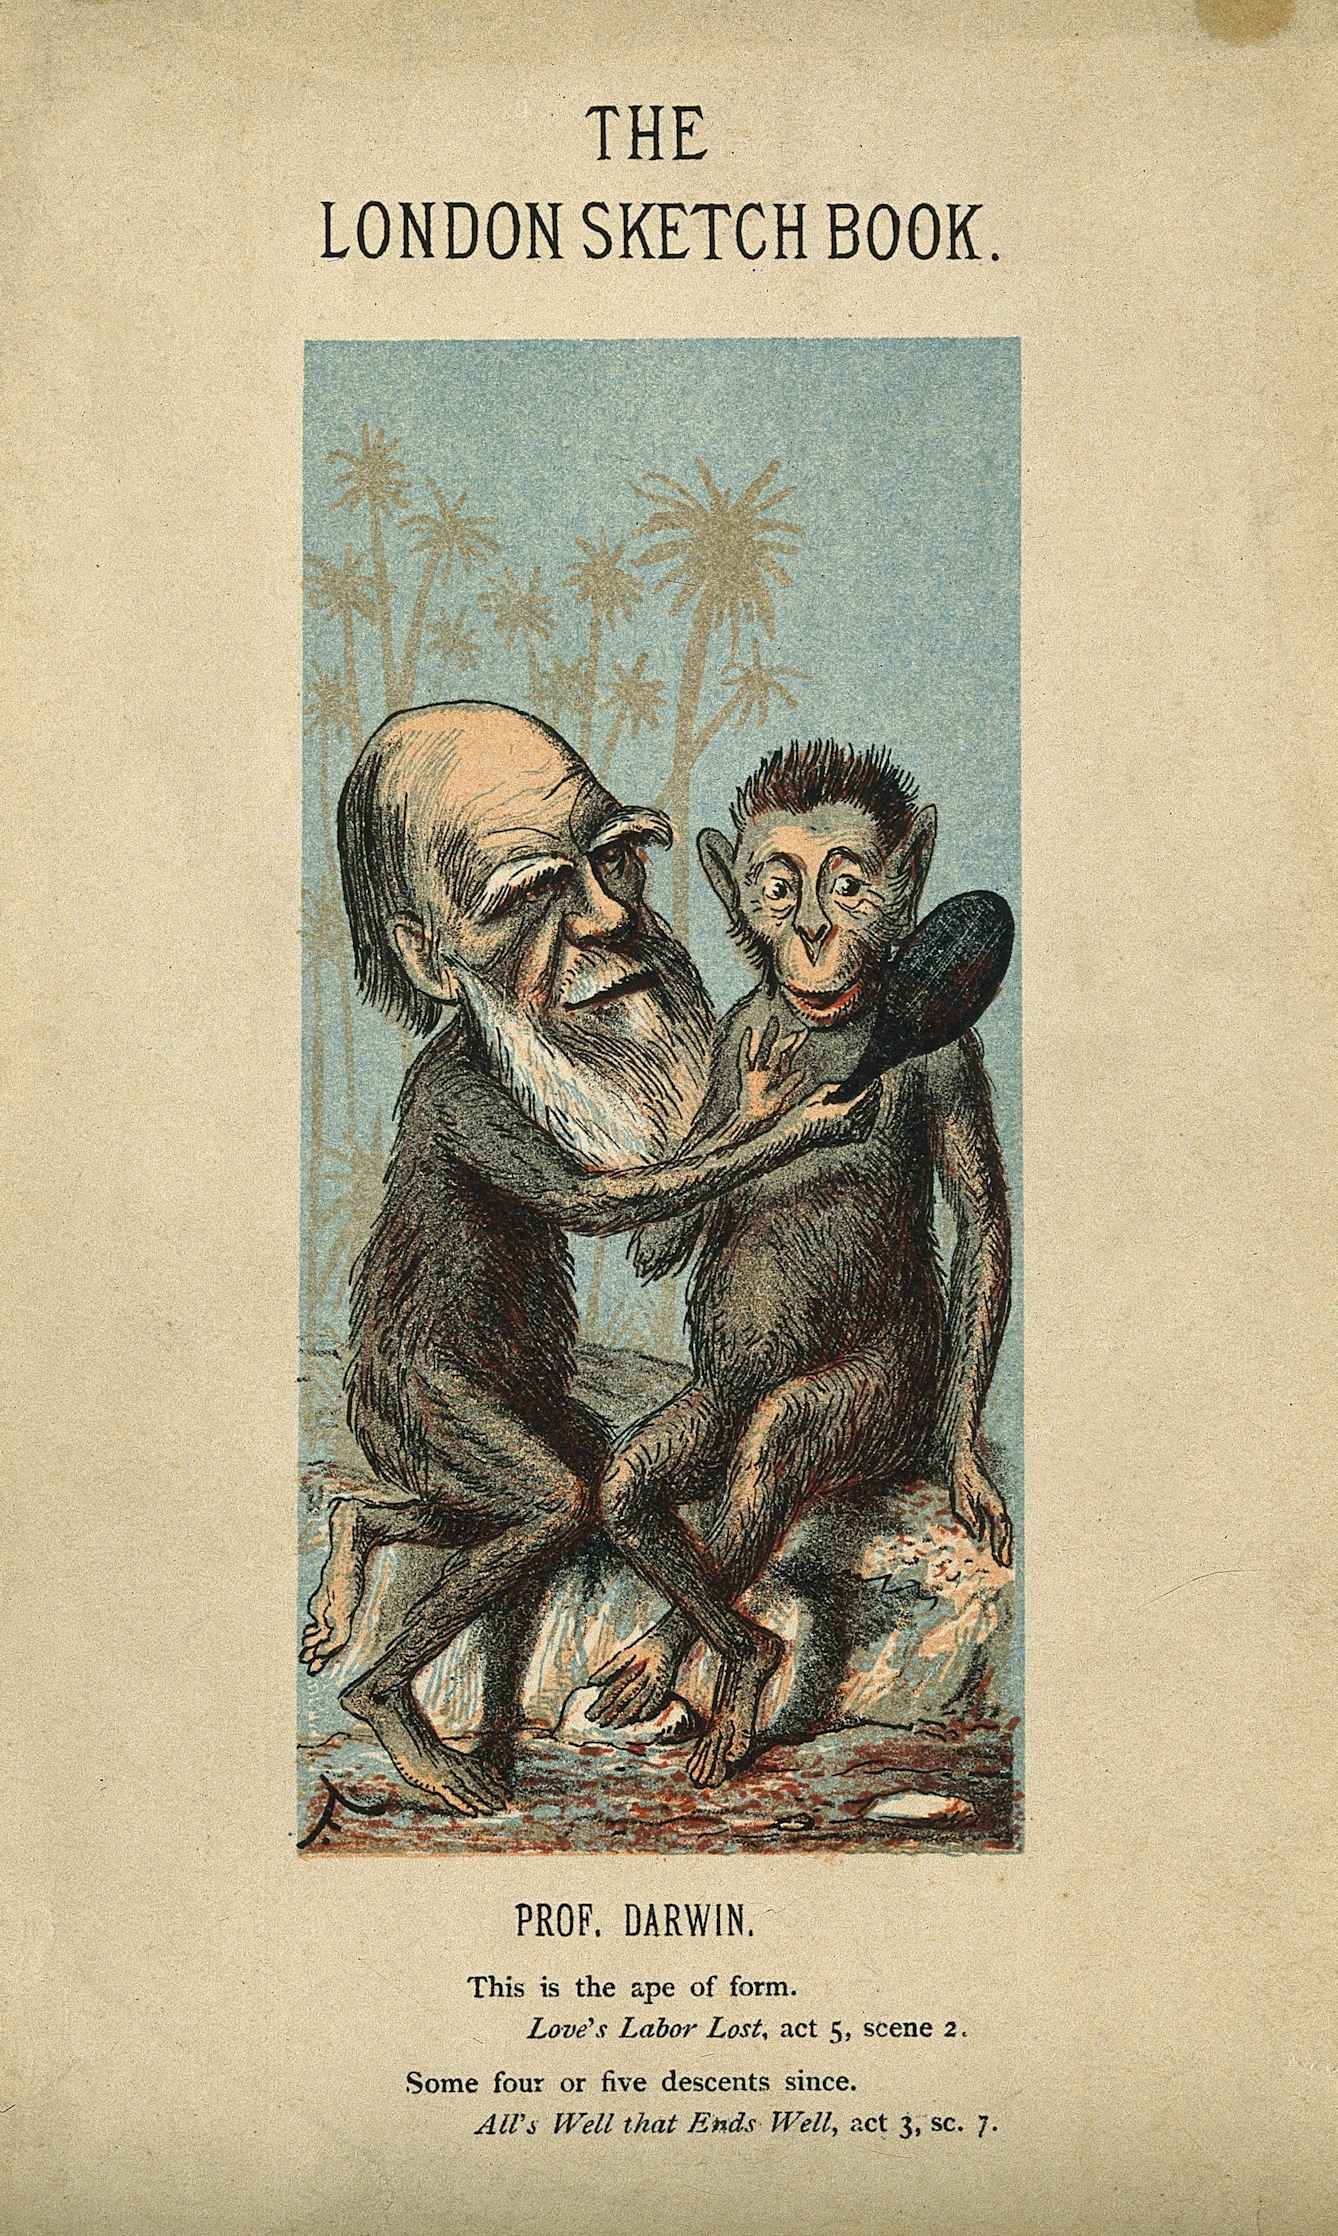 Front page of "The London Sketch Book" with a picture depicting Darwin as an ape showing a mirror to another ape. Text reads: "Prof. Darwin. ; This is the ape of form., Love's Labor Lost, act 5, scene 2. ; Some four or five descents since. All's Well that Ends Well, act 3, sc. 7."